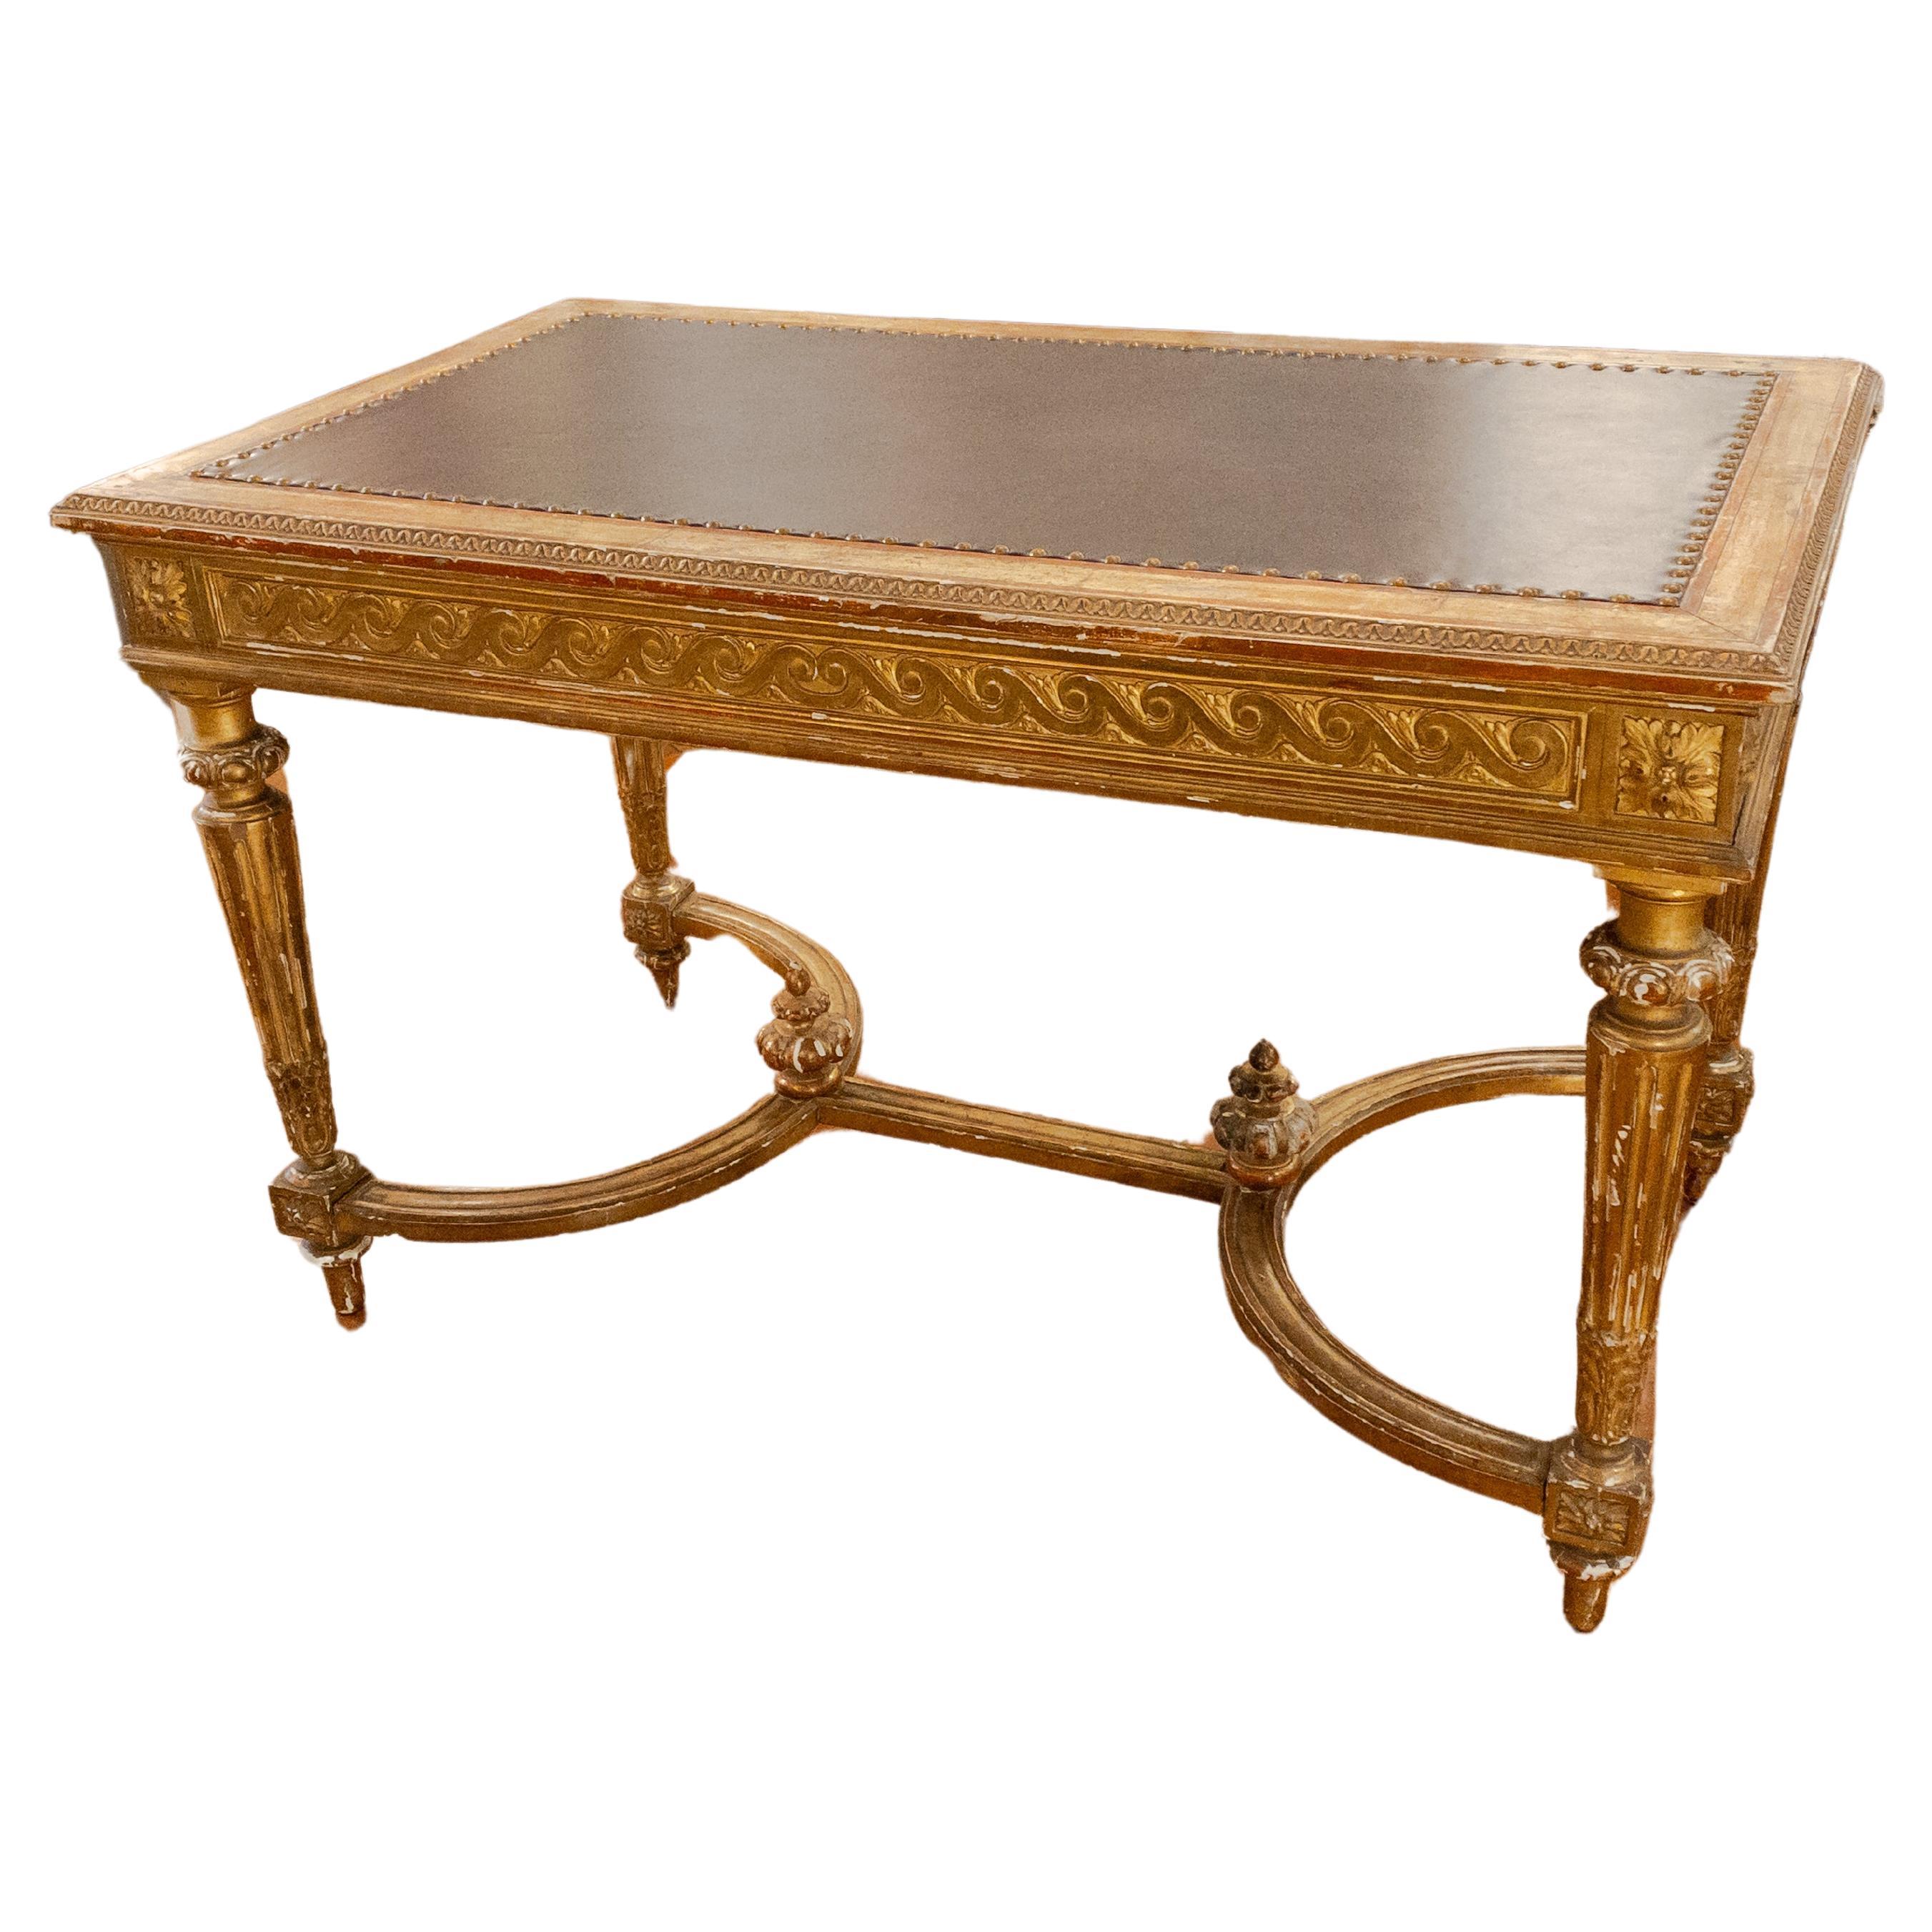 19th Century Empire Style Gold Leaf Library Table / Desk For Sale